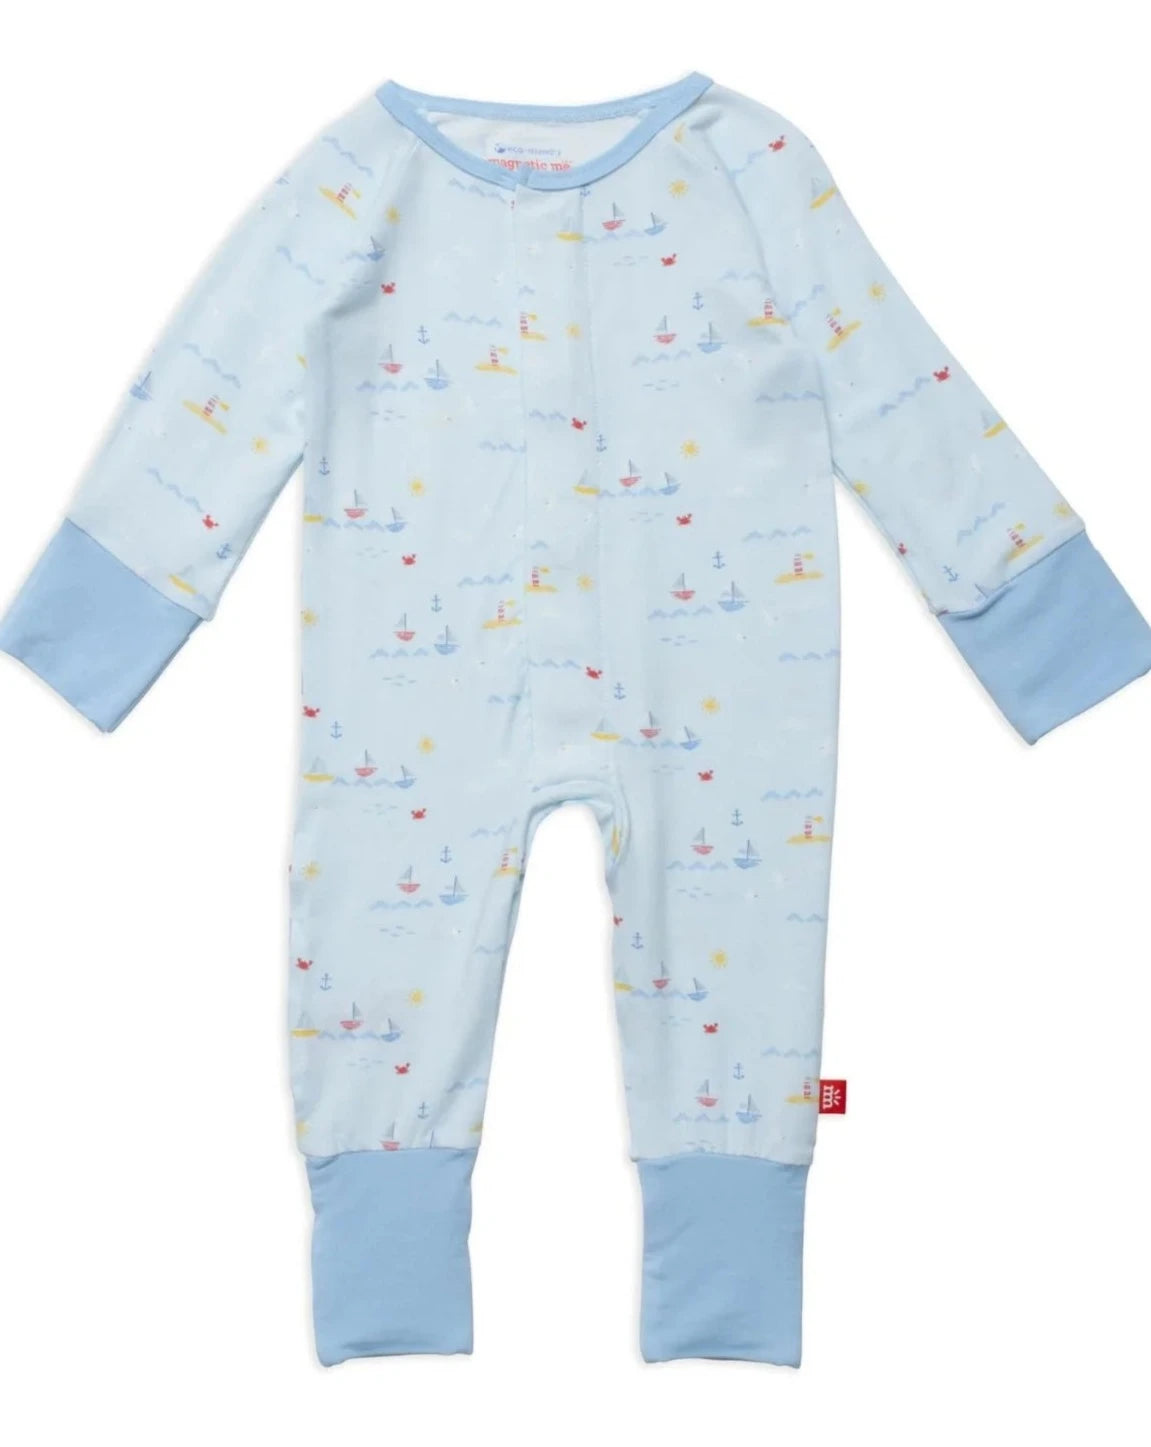 Sail-ebrate Good Times Convertible Coverall